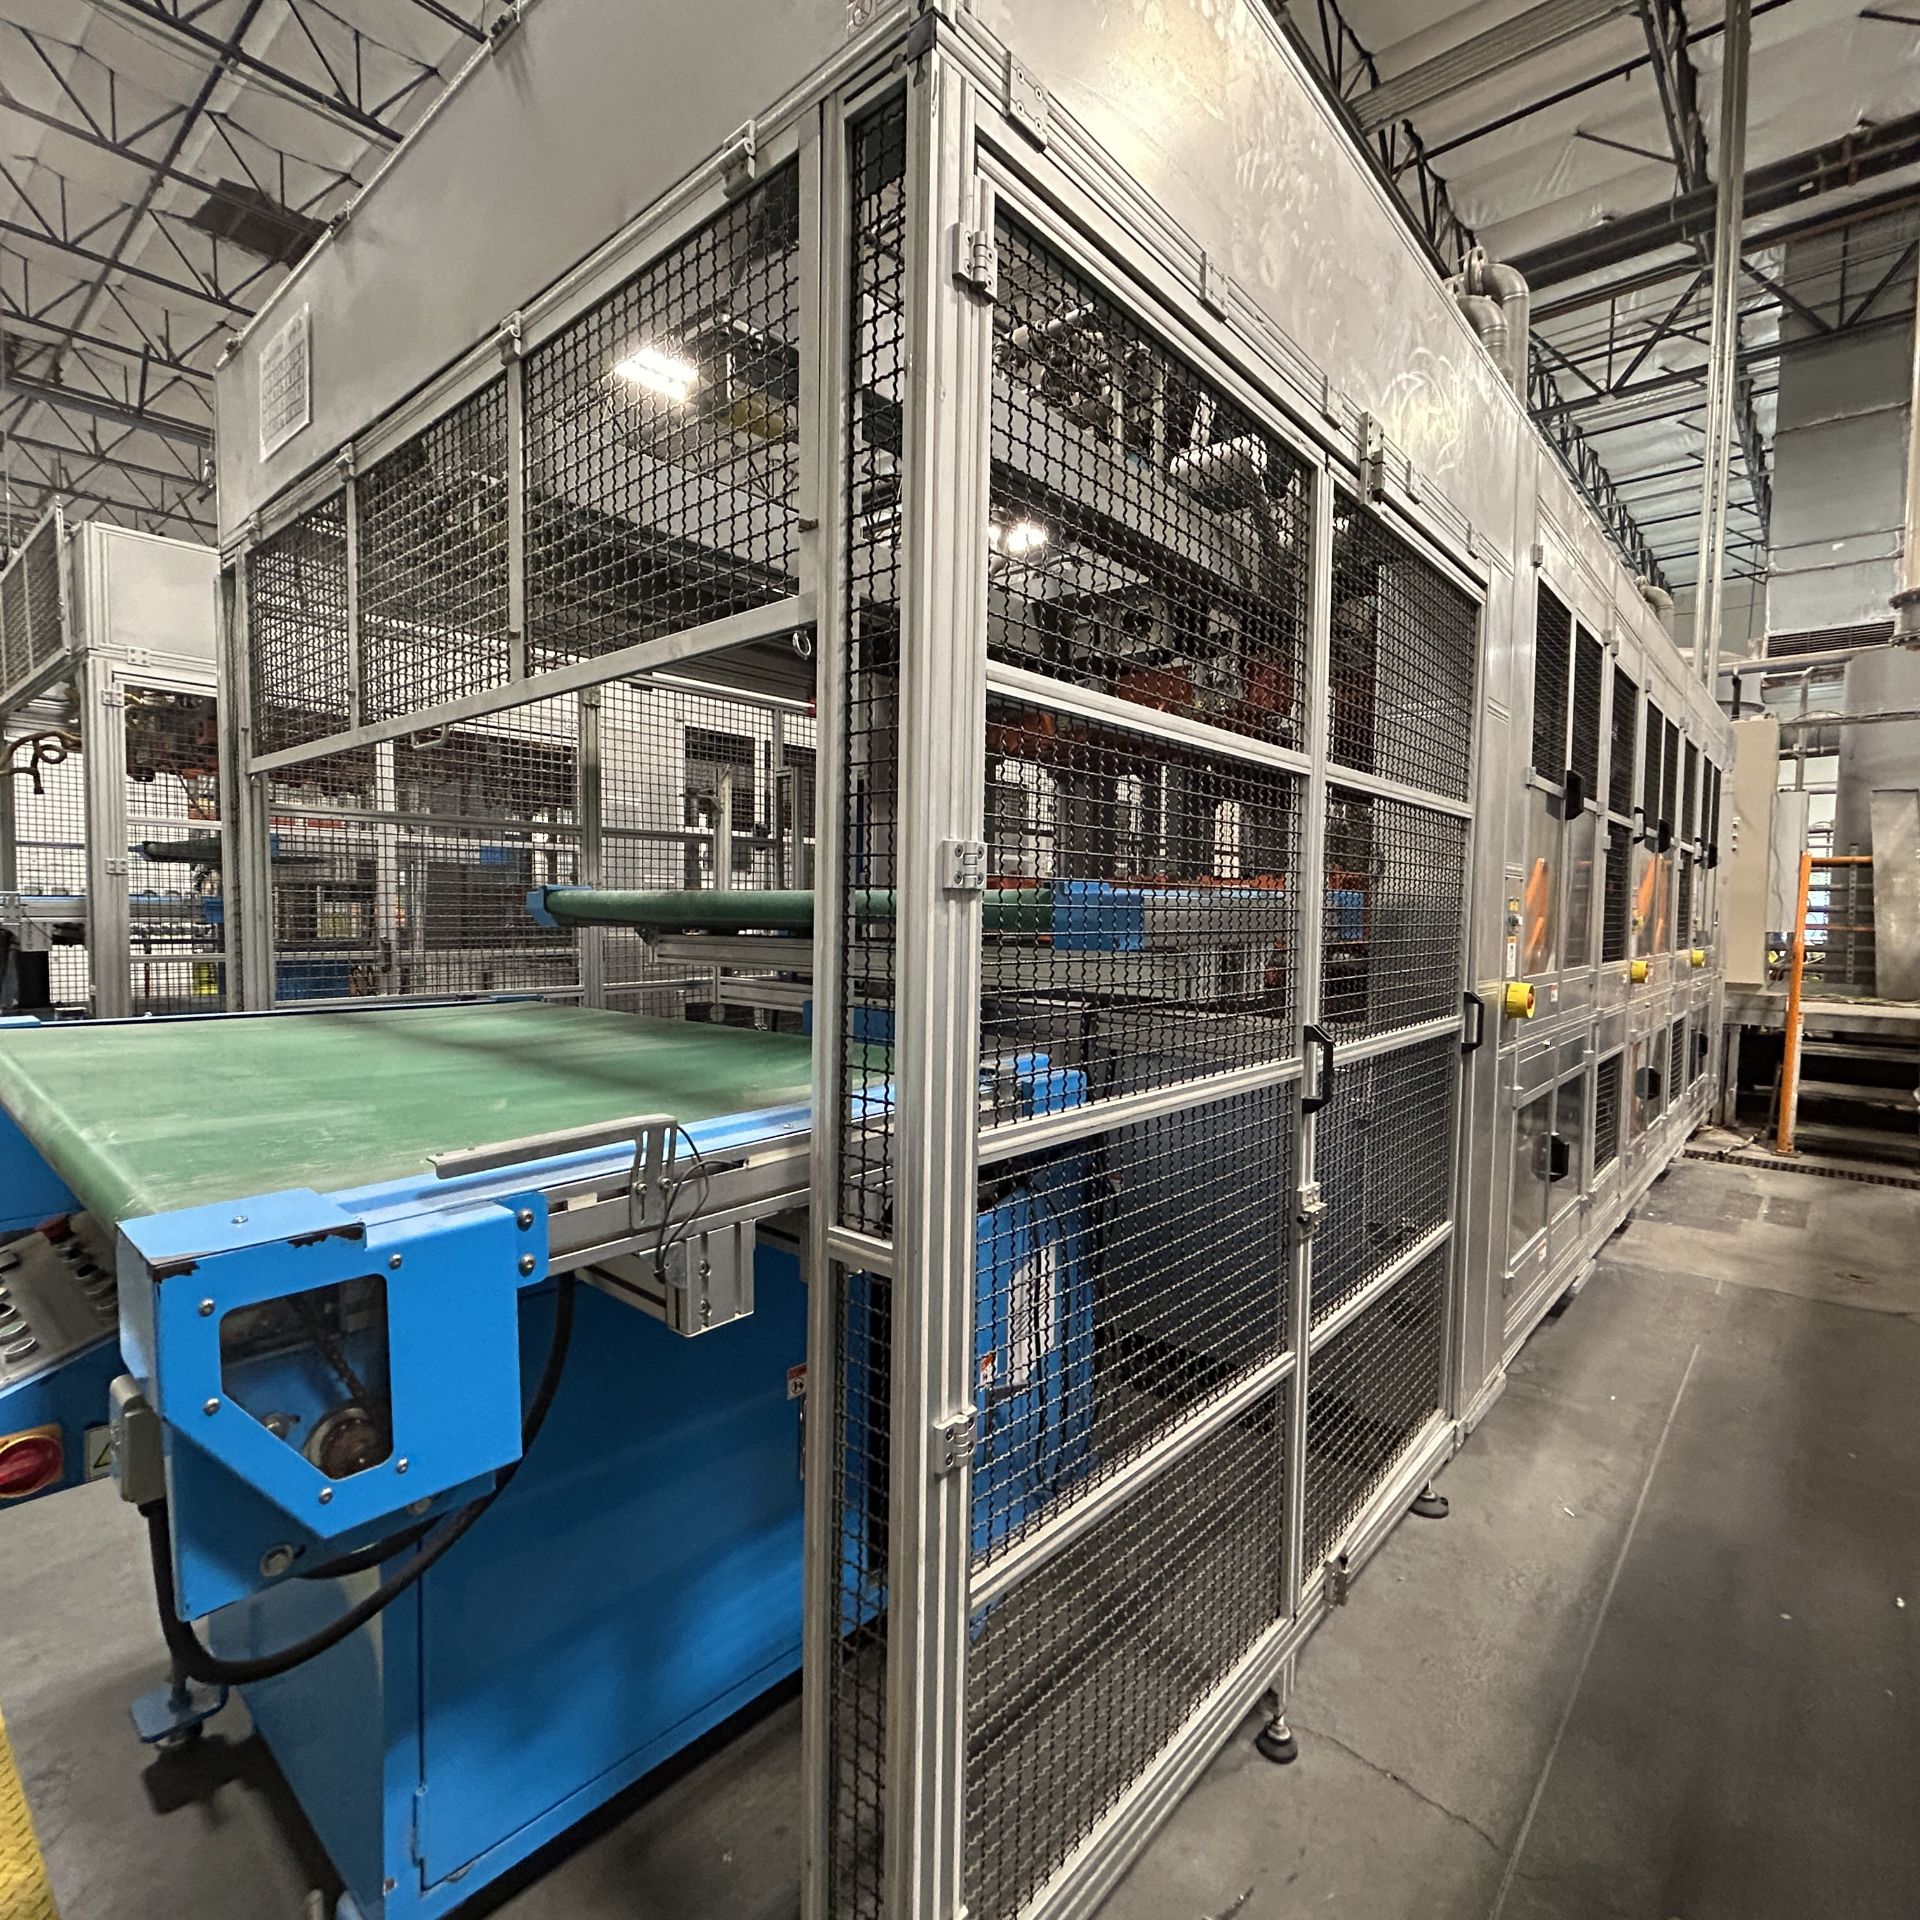 TPM-1500 3-Stage Pulp Thermoforming Machine Equipped With (1) 2018 TPM-AS-1500 2-Stage Auto Stacker - Image 3 of 35